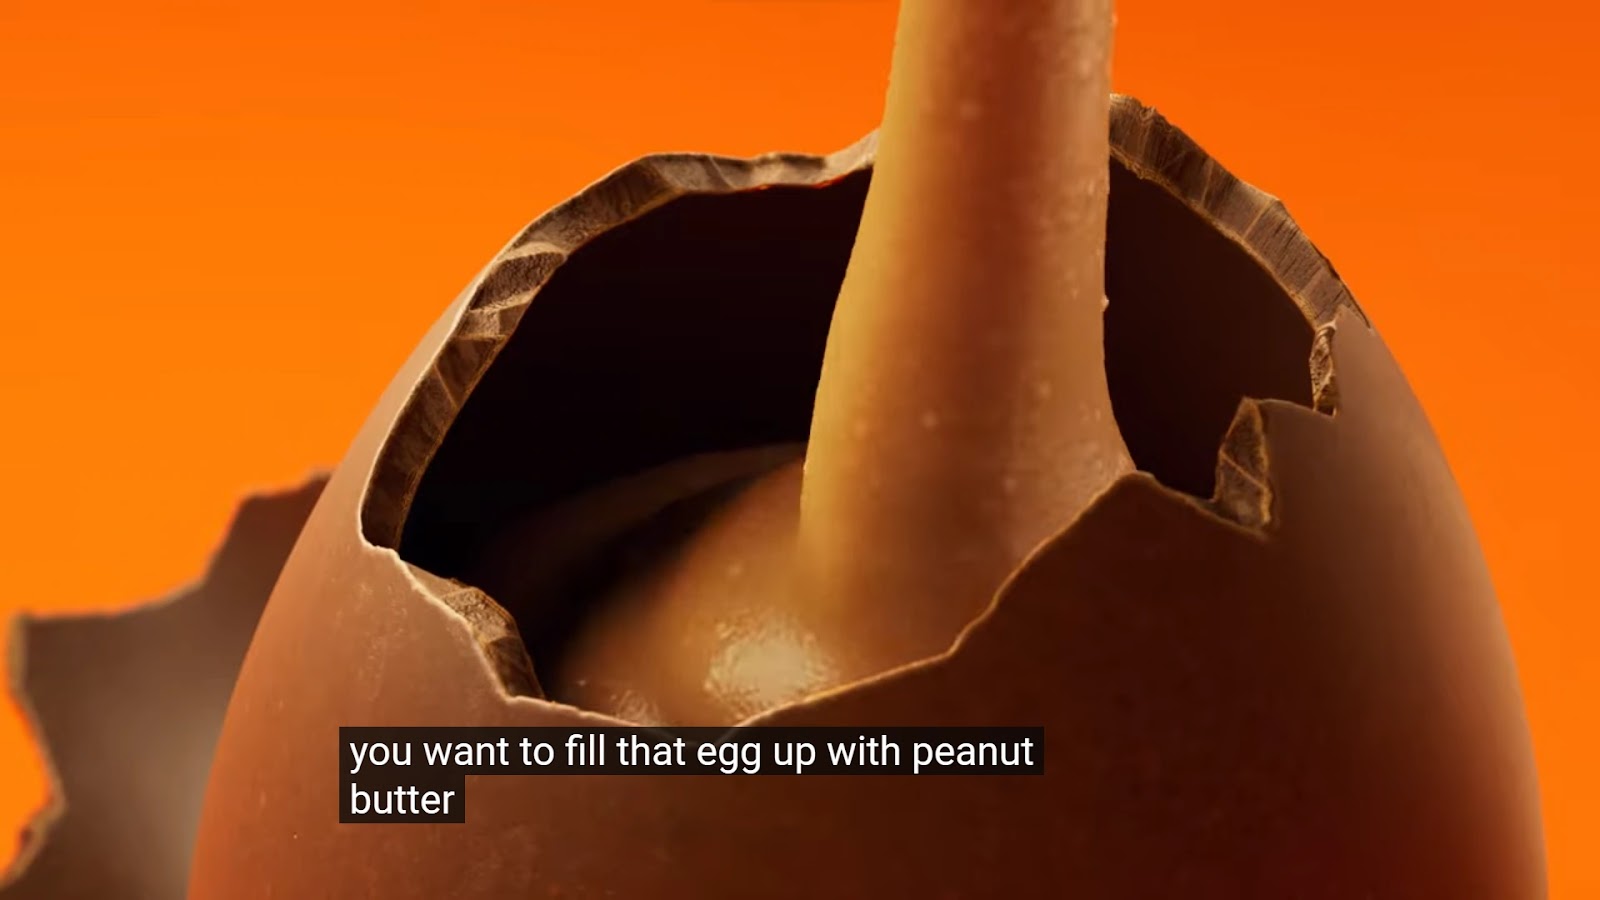 A screenshot from Reese’s video campaign